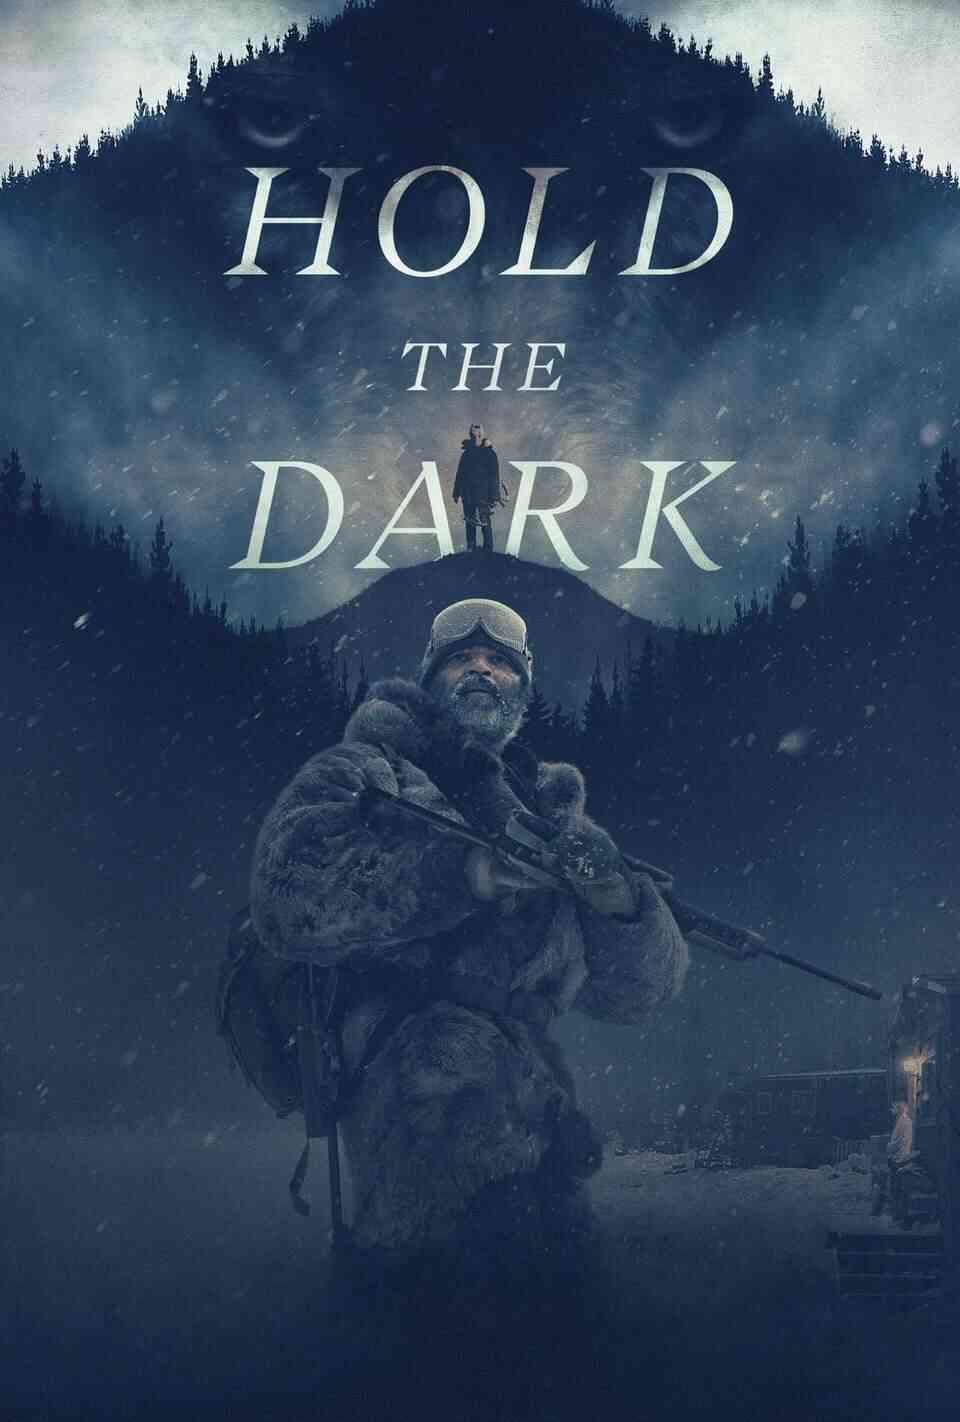 Read Hold the Dark screenplay (poster)